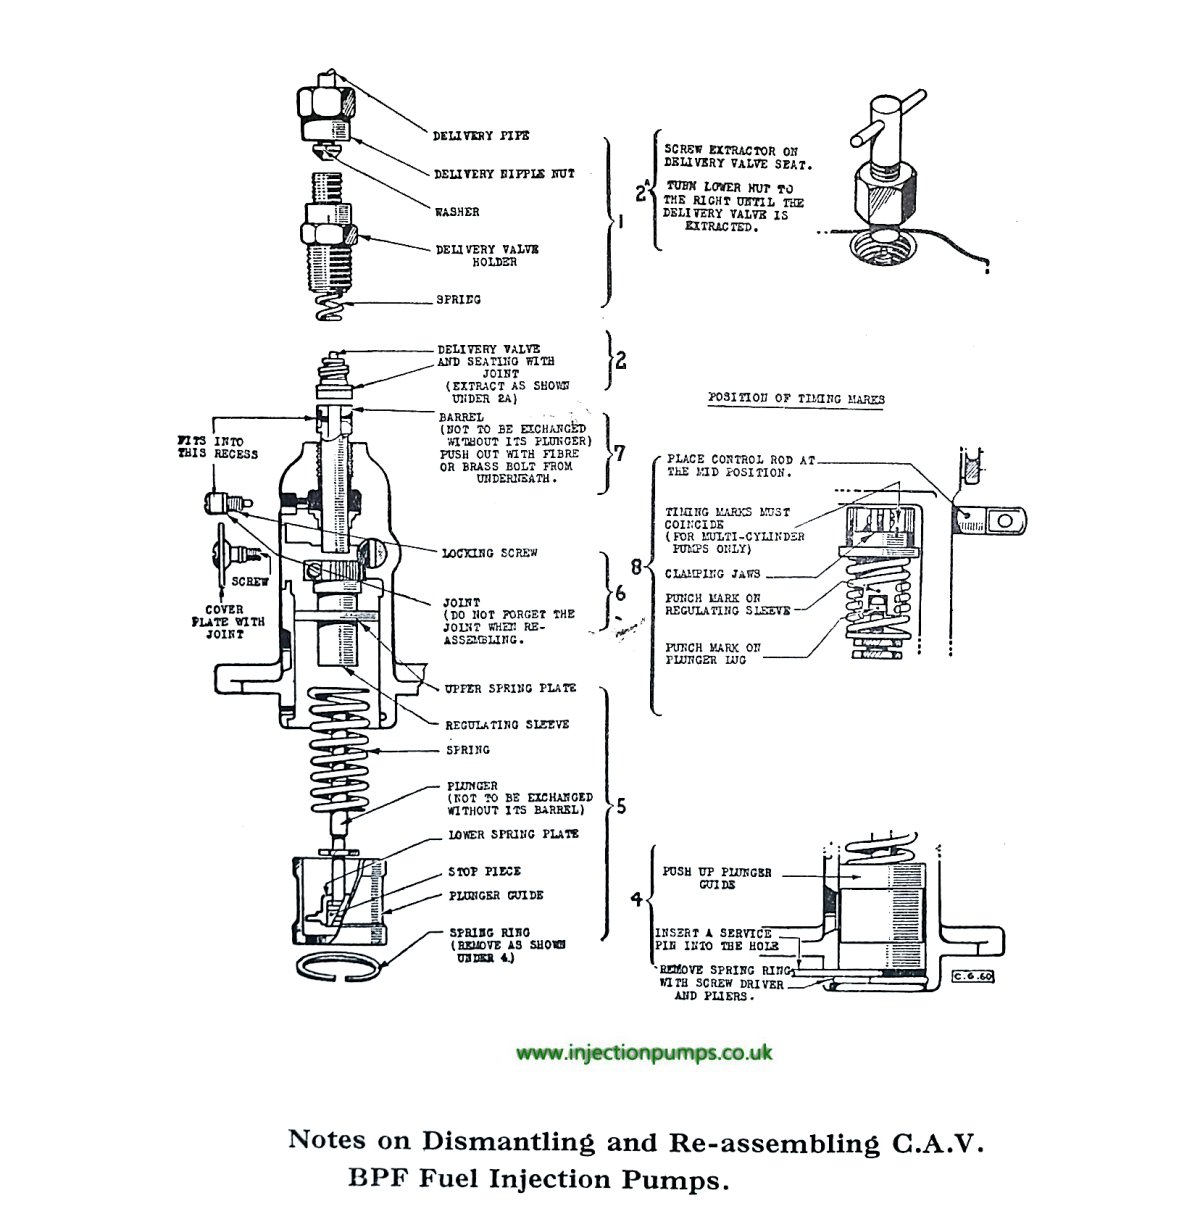 Exploded diagrams - Diesel Injection Pumps